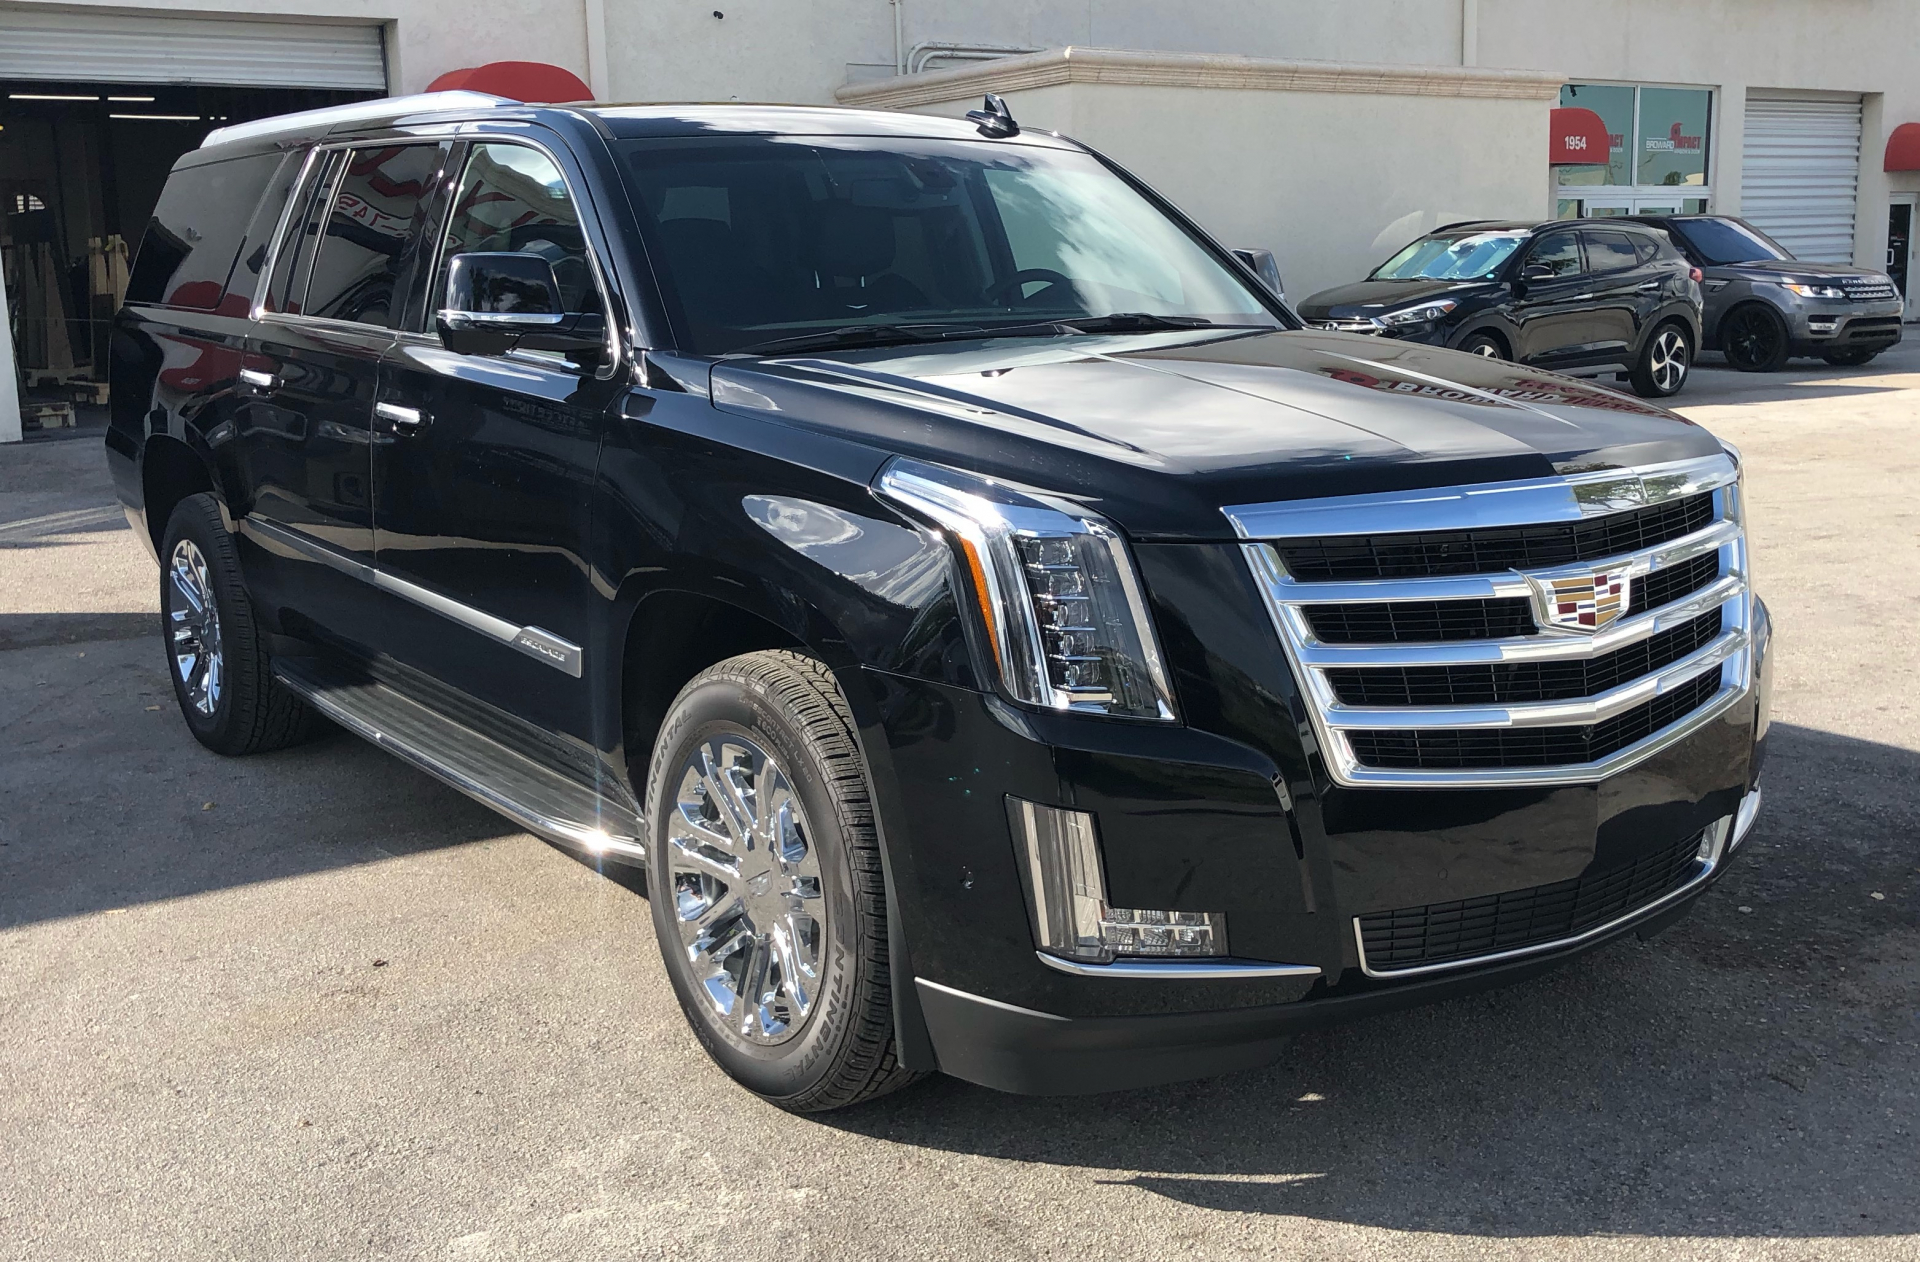 Cadillac SUV
SUV /
Fort Lauderdale, FL

 / Hourly $0.00
